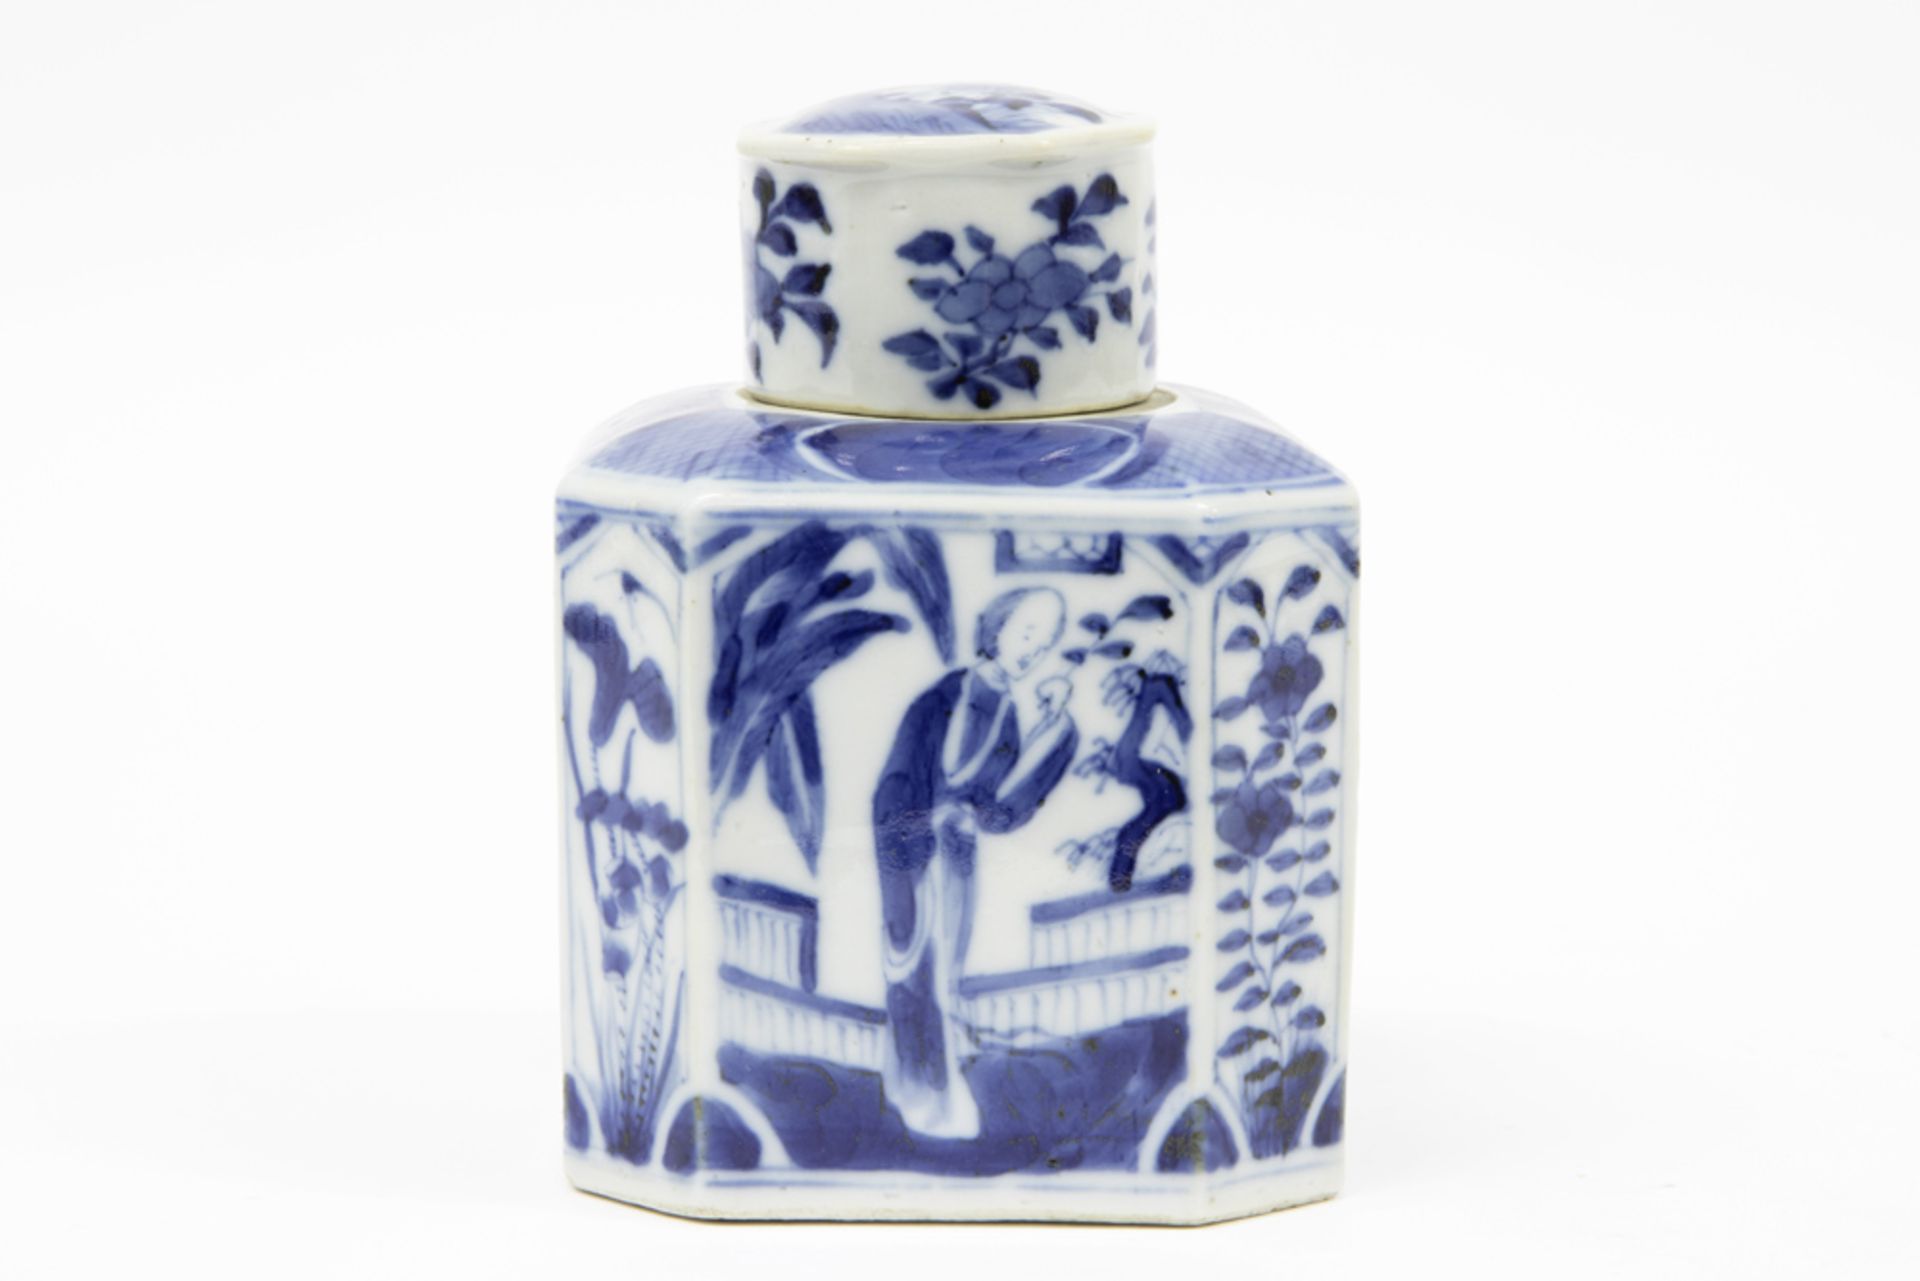 18th Cent. Chinese lidded teacaddy in porcelain with a blue-white decor with Long Eliza's decor (Mei